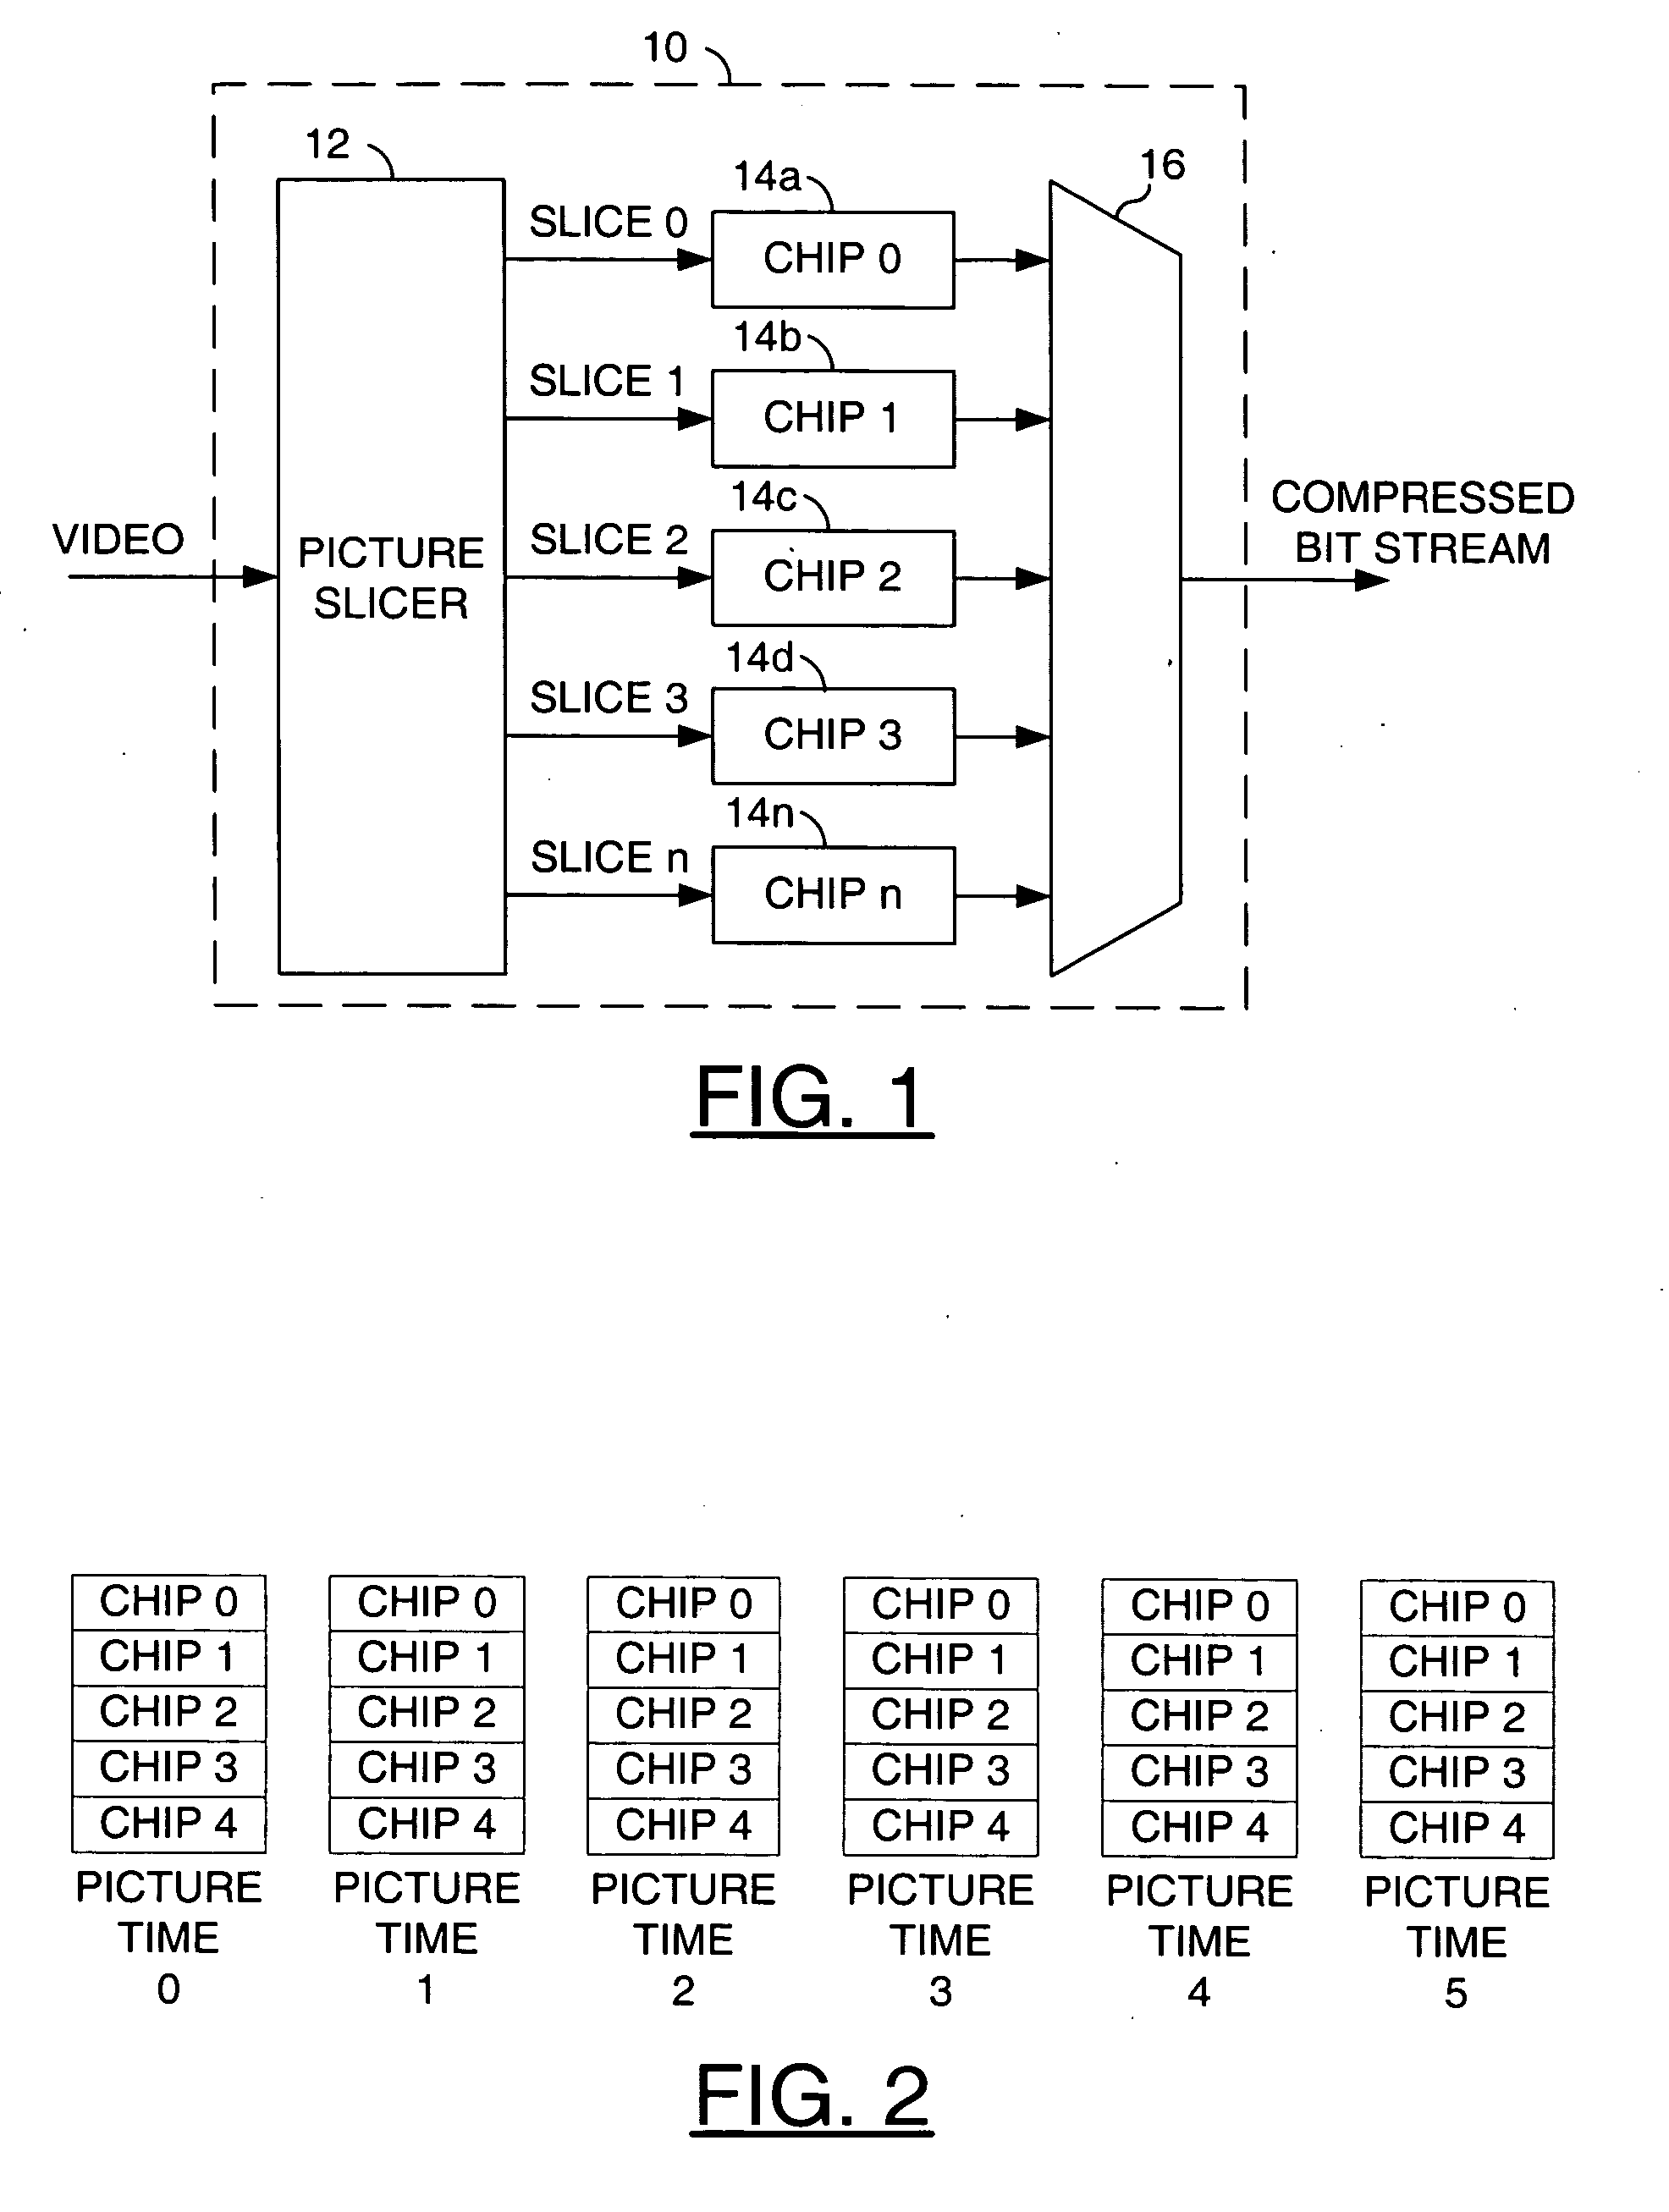 Parallel video encoder with whole picture deblocking and/or whole picture compressed as a single slice